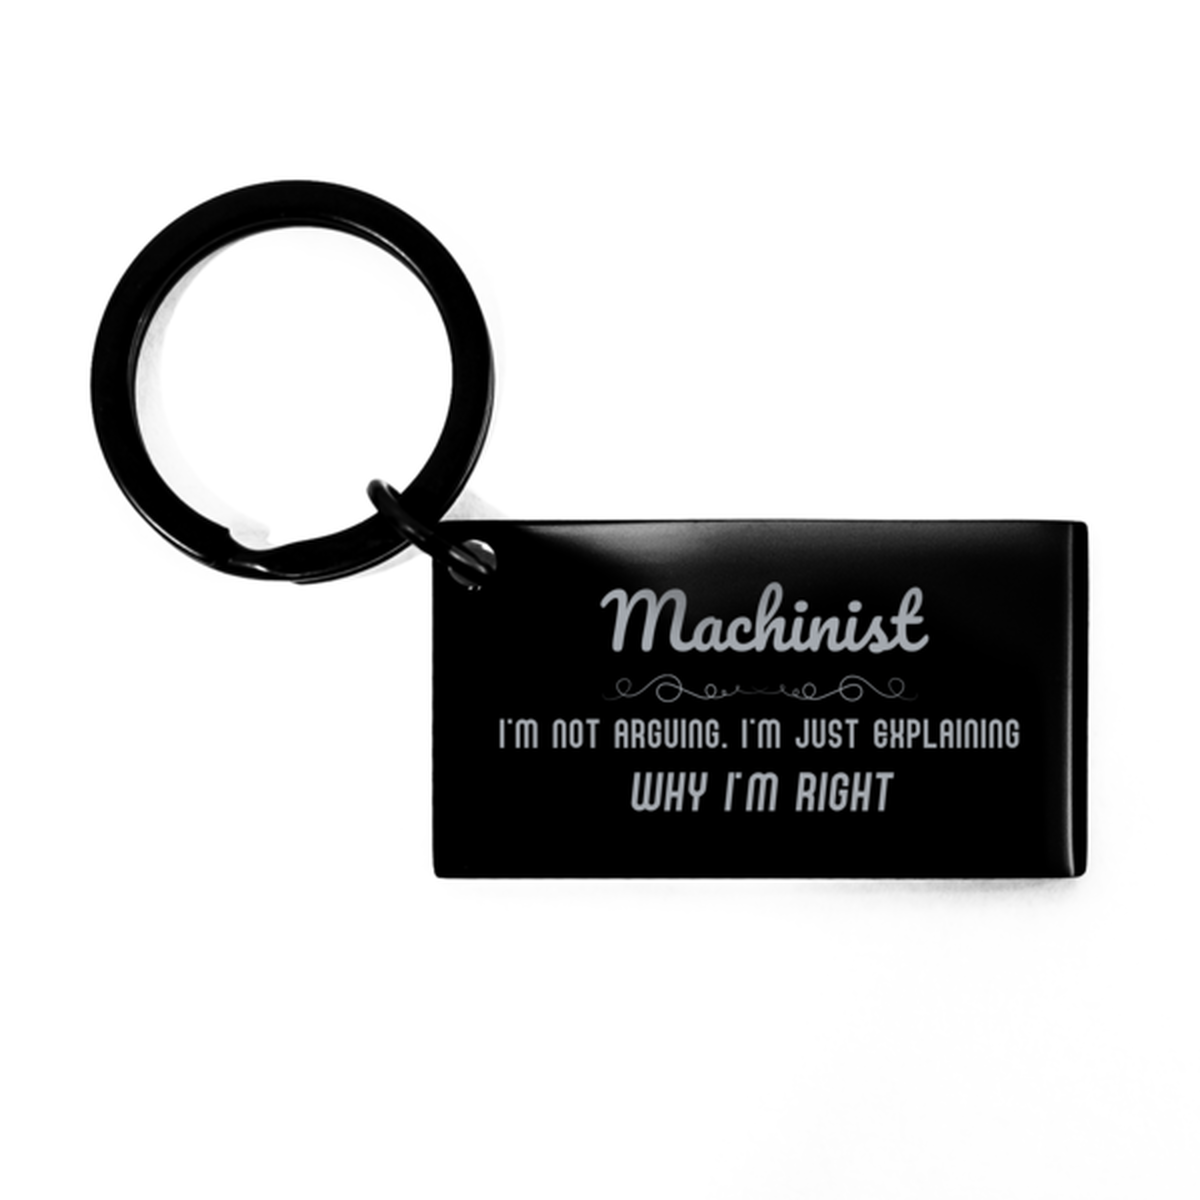 Machinist I'm not Arguing. I'm Just Explaining Why I'm RIGHT Keychain, Funny Saying Quote Machinist Gifts For Machinist Graduation Birthday Christmas Gifts for Men Women Coworker